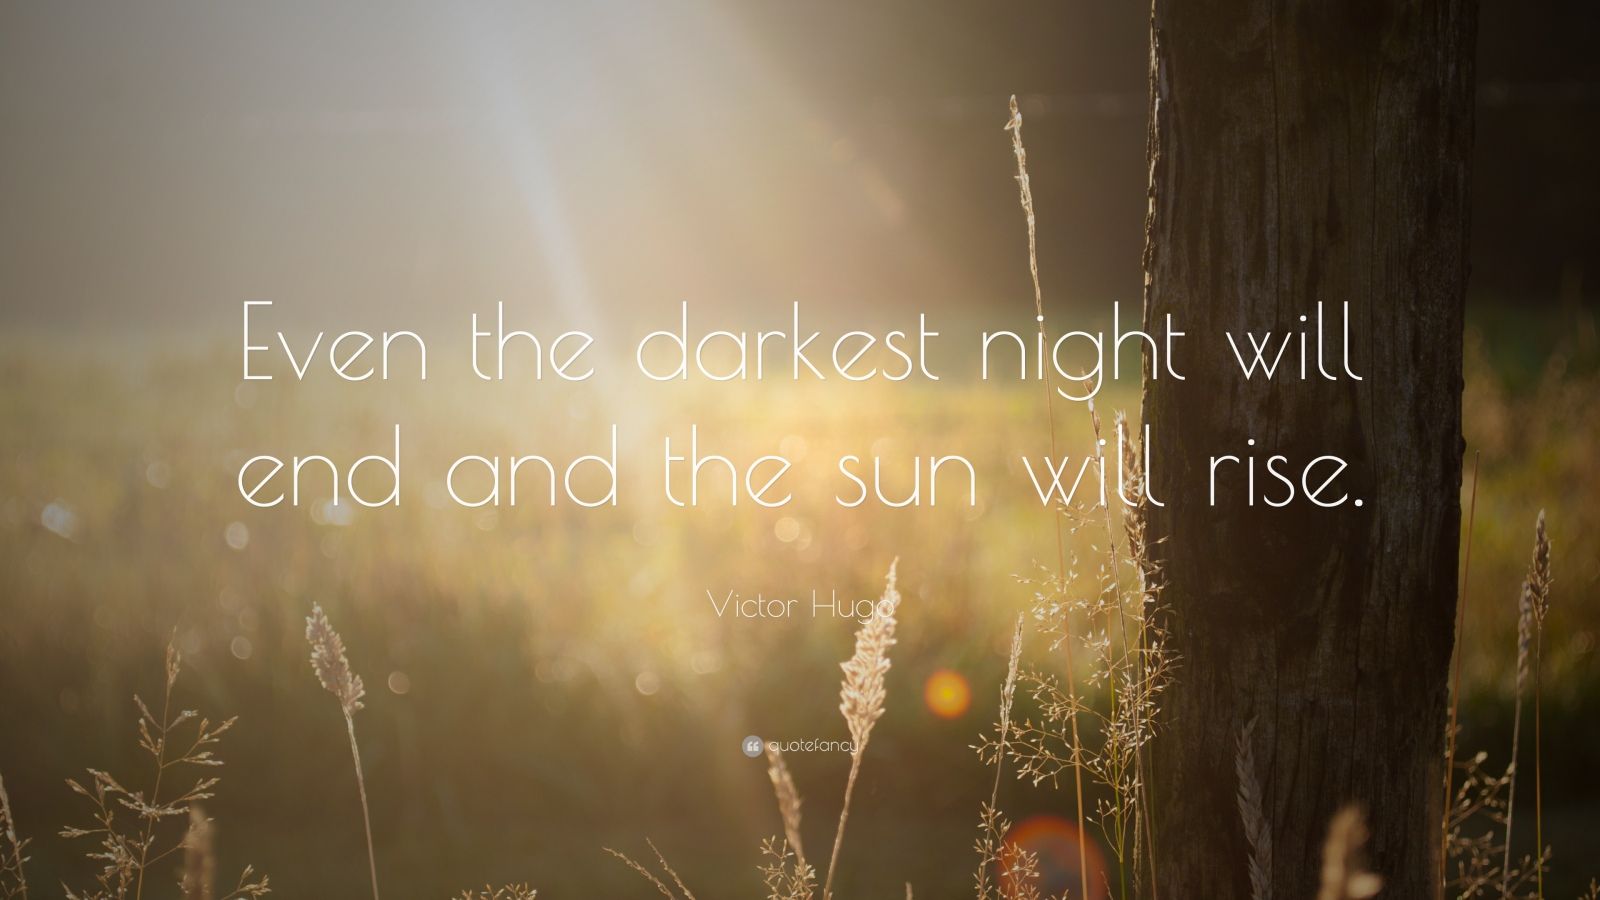 Victor Hugo Quote: “Even the darkest night will end and the sun will ...